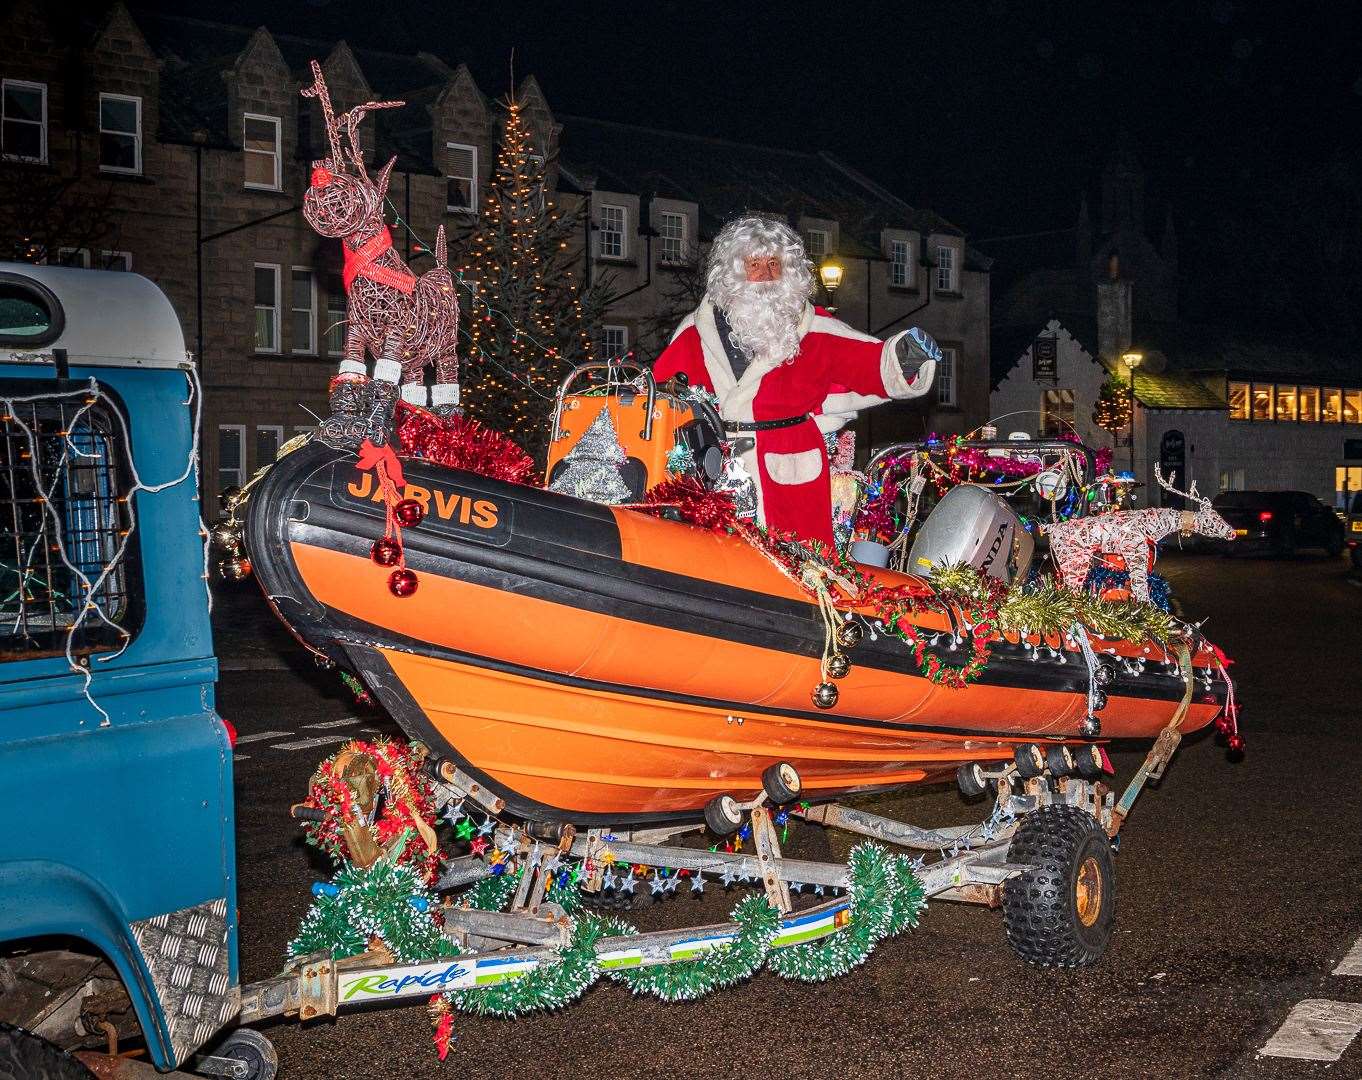 The boat was festooned in tinsel and bedecked with reindeer figures. Picture: Andy Kirby